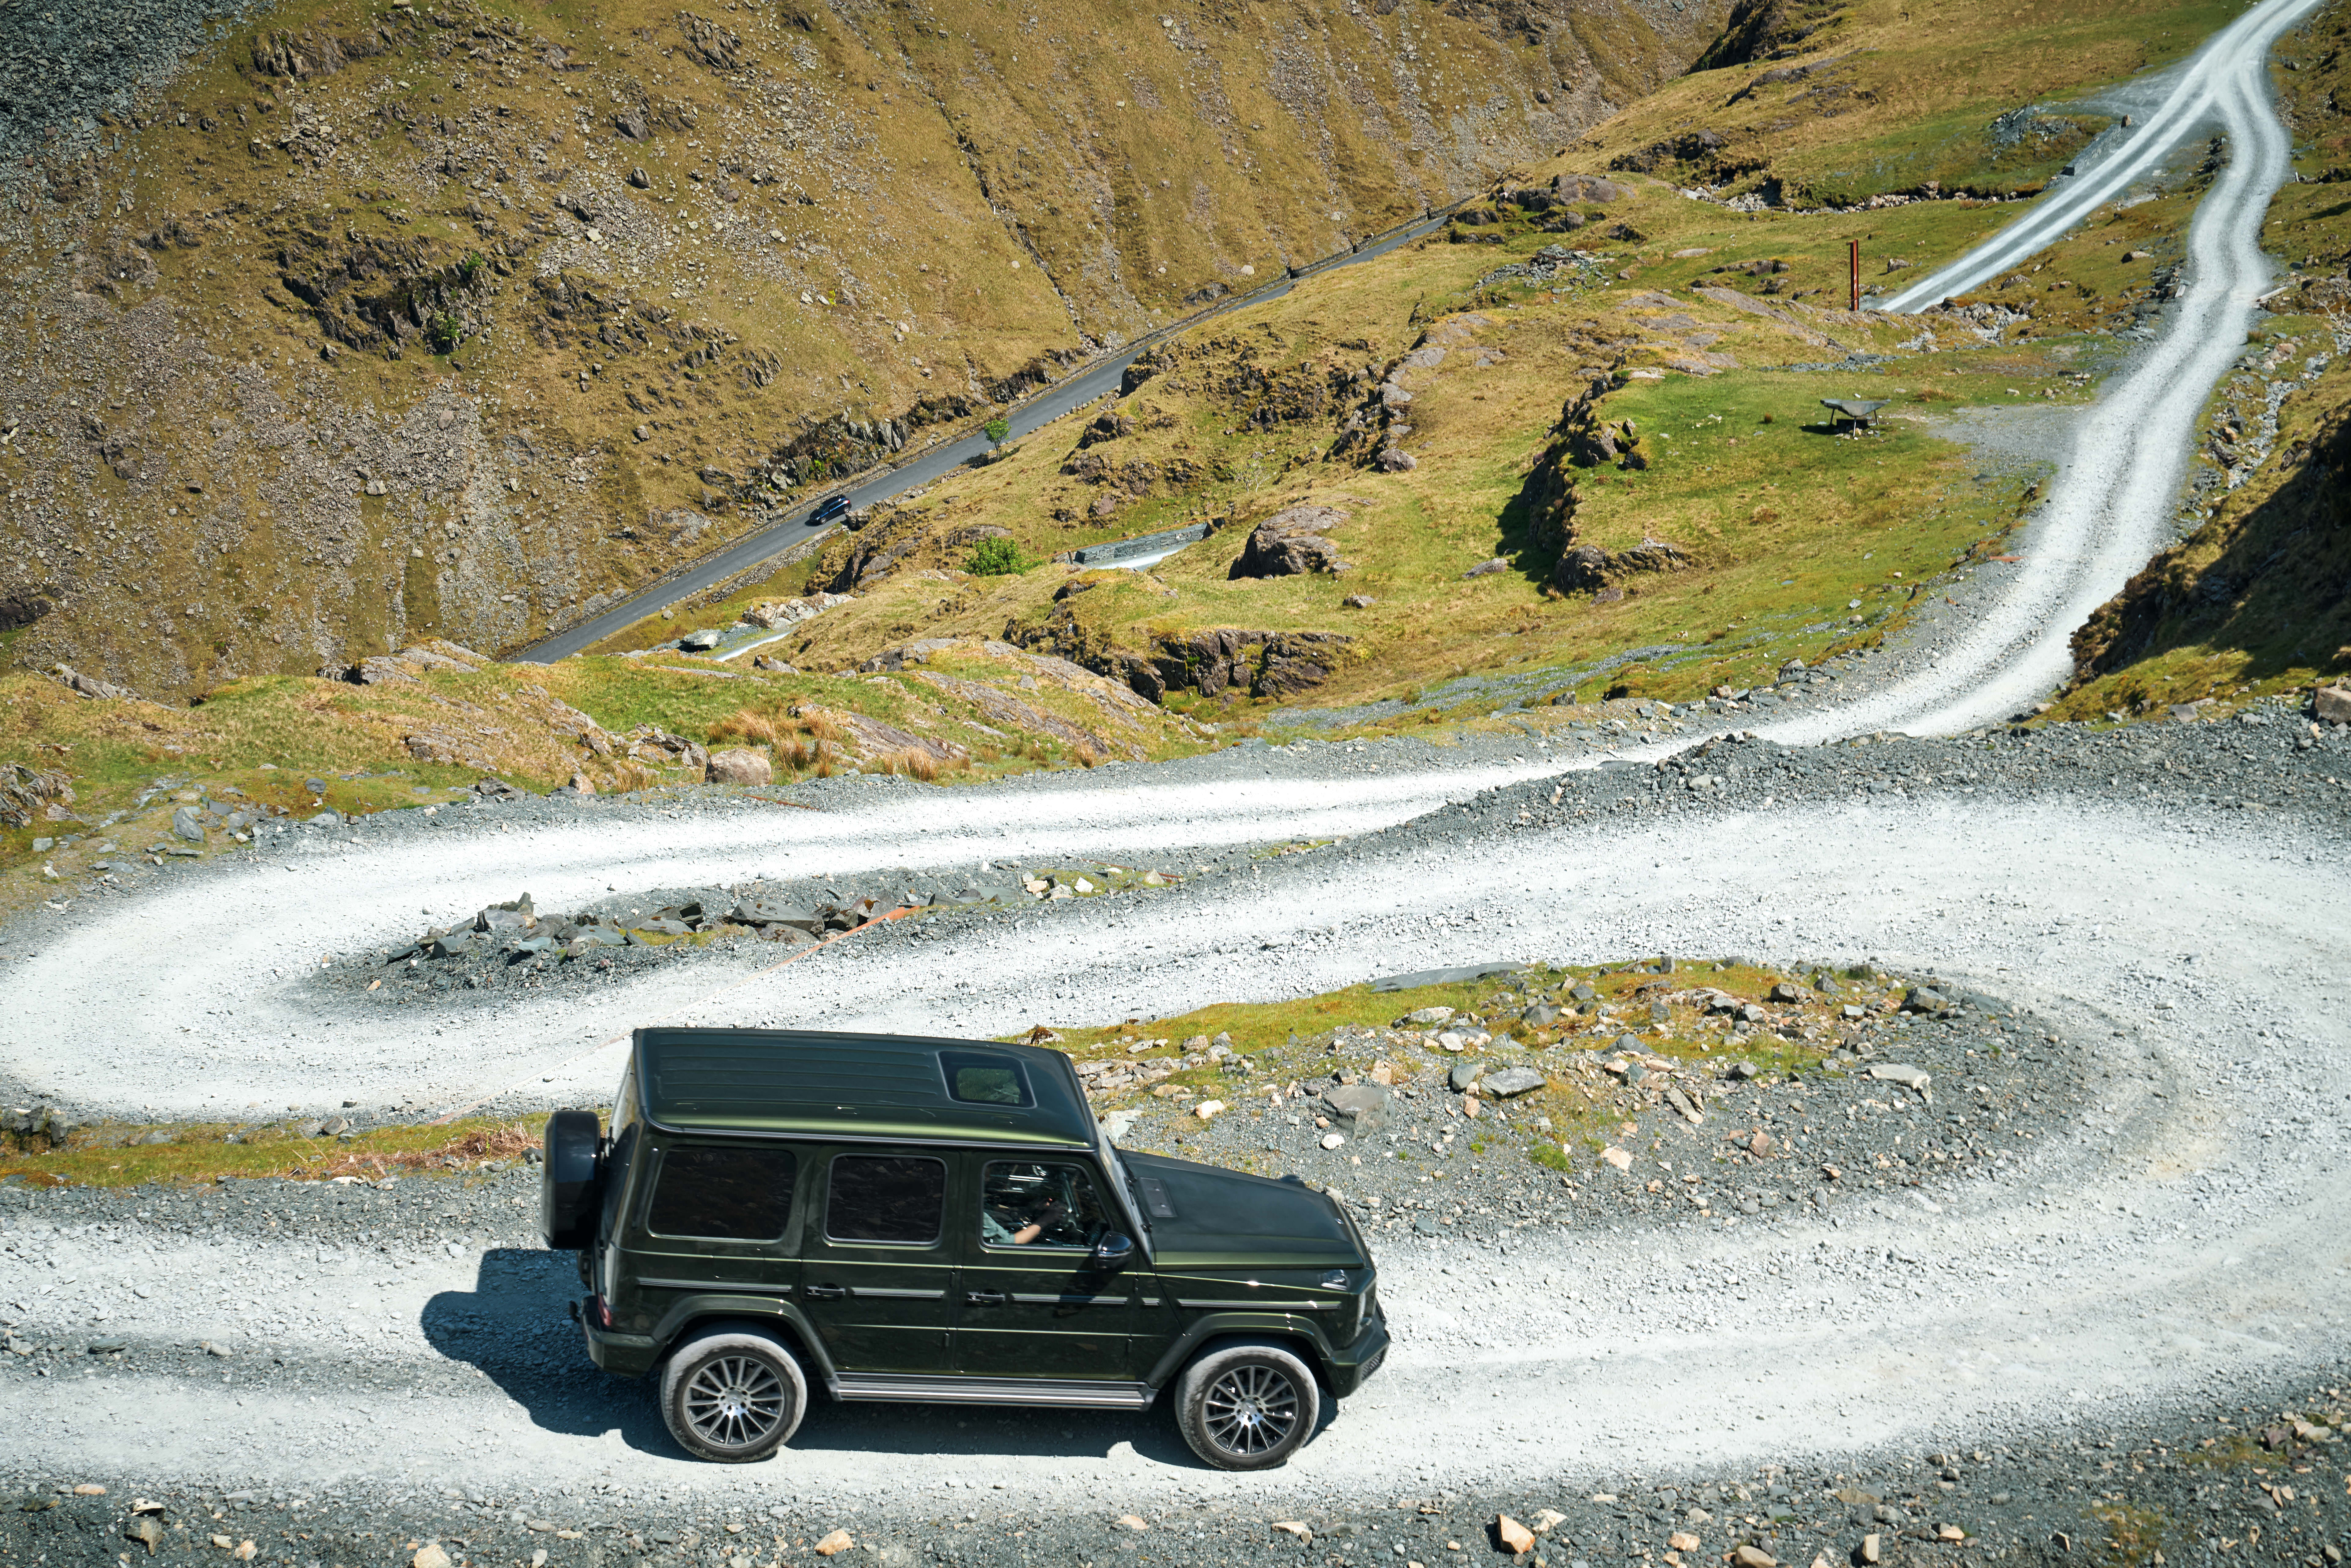 The G-Class is one of the best off-roaders on sale today